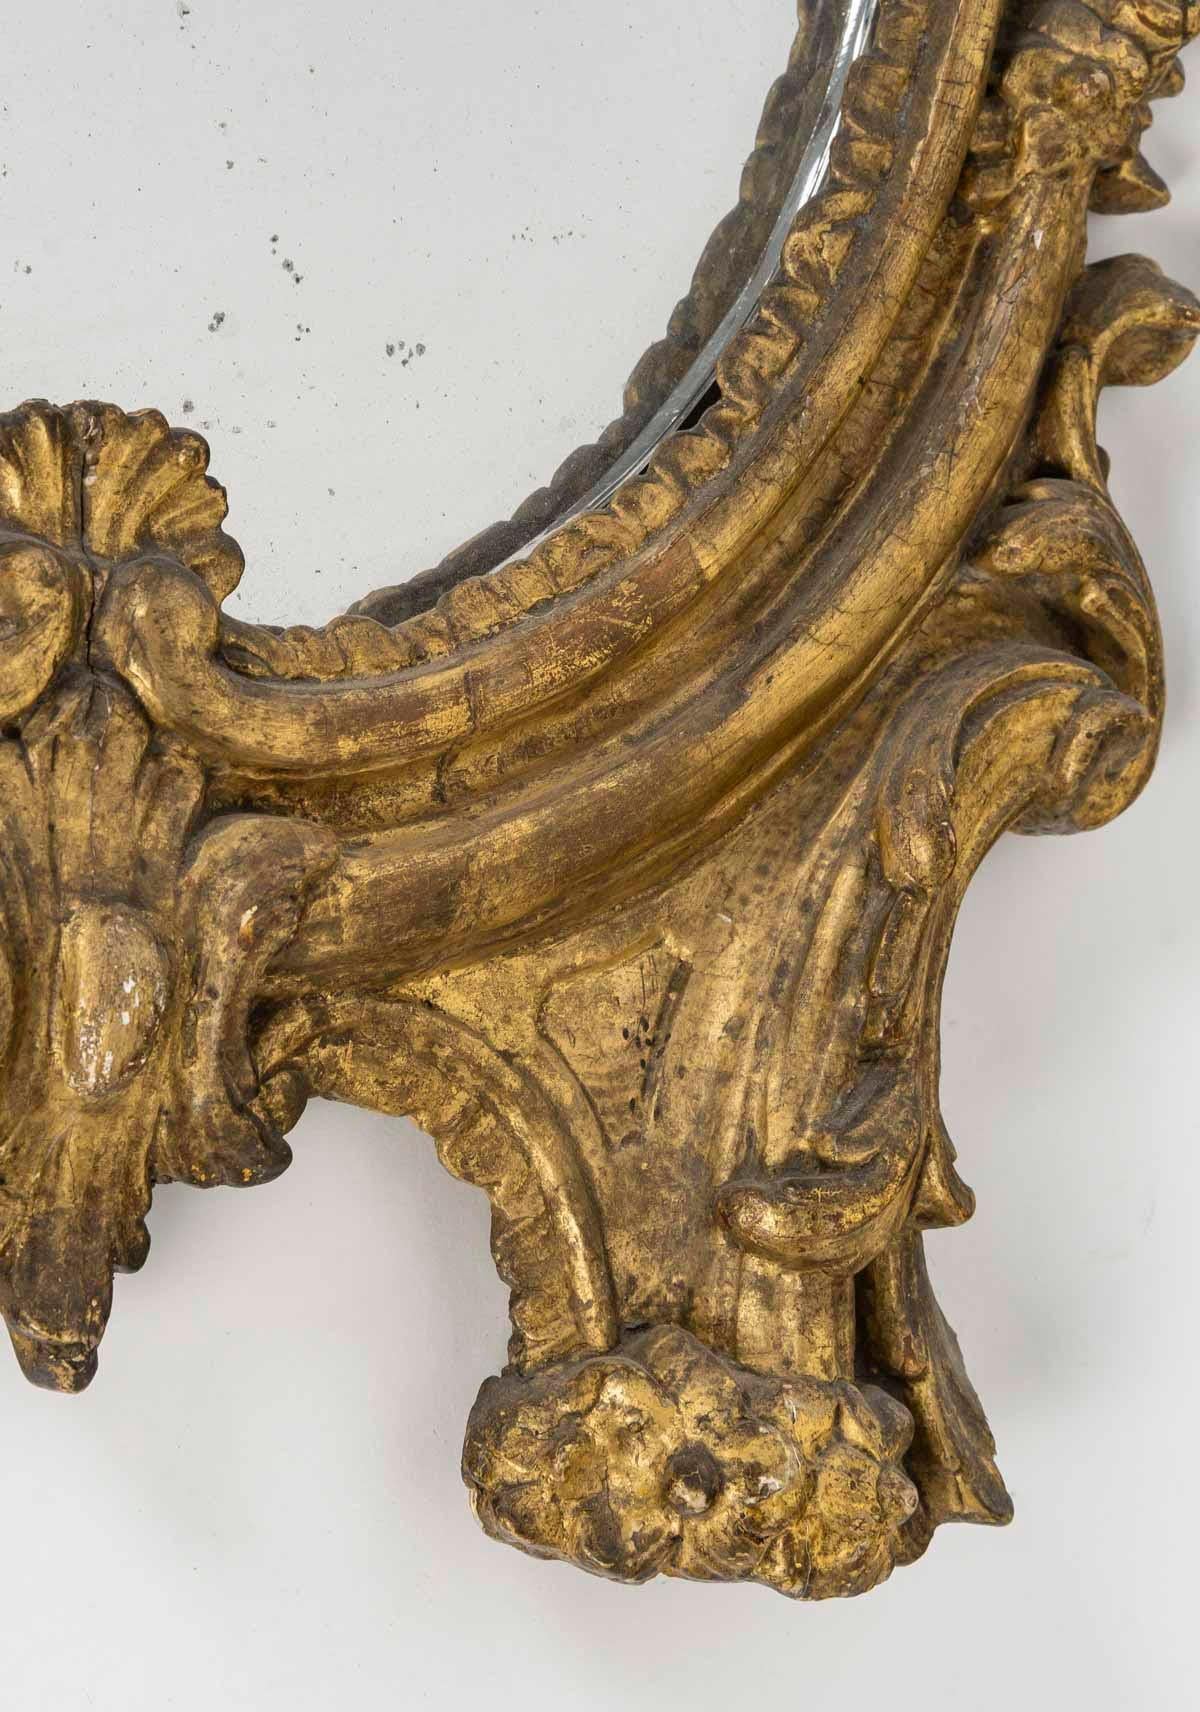 A Louis XV period carved and gilded wood wall mirror, 18th century.

A Louis XV period wall mirror, 18th century, carved and gilded wood, later mirror.
H: 58cm , W: 30cm, D: 5cm